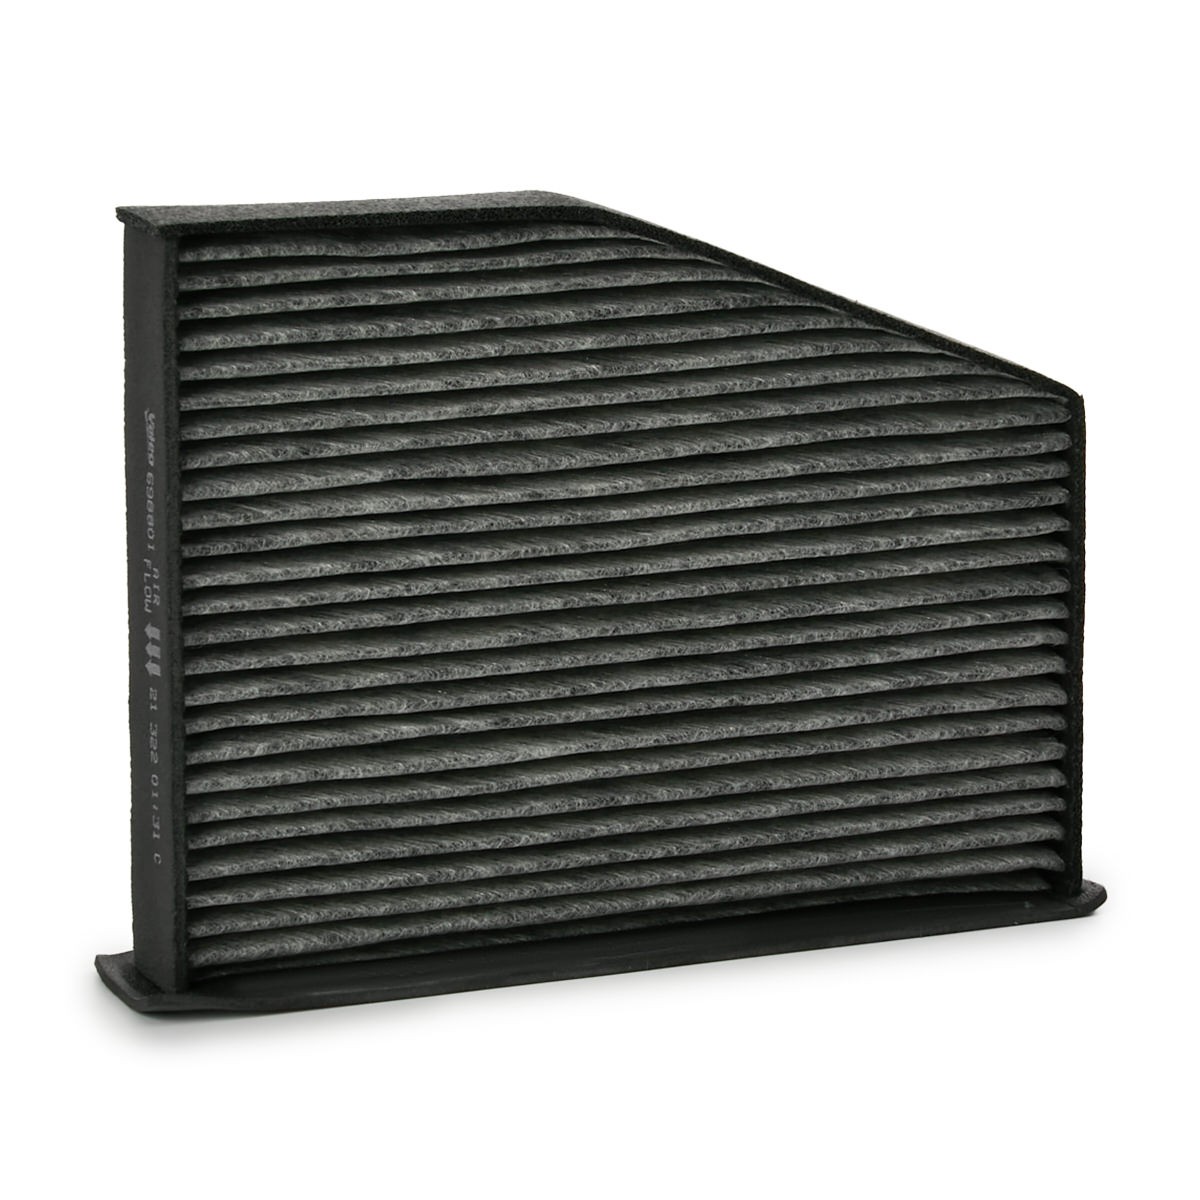 VALEO CLIMFILTER PROTECT Activated Carbon Filter, 279 mm x 216 mm x 57 mm Width: 216mm, Height: 57mm, Length: 279mm Cabin filter 698801 buy